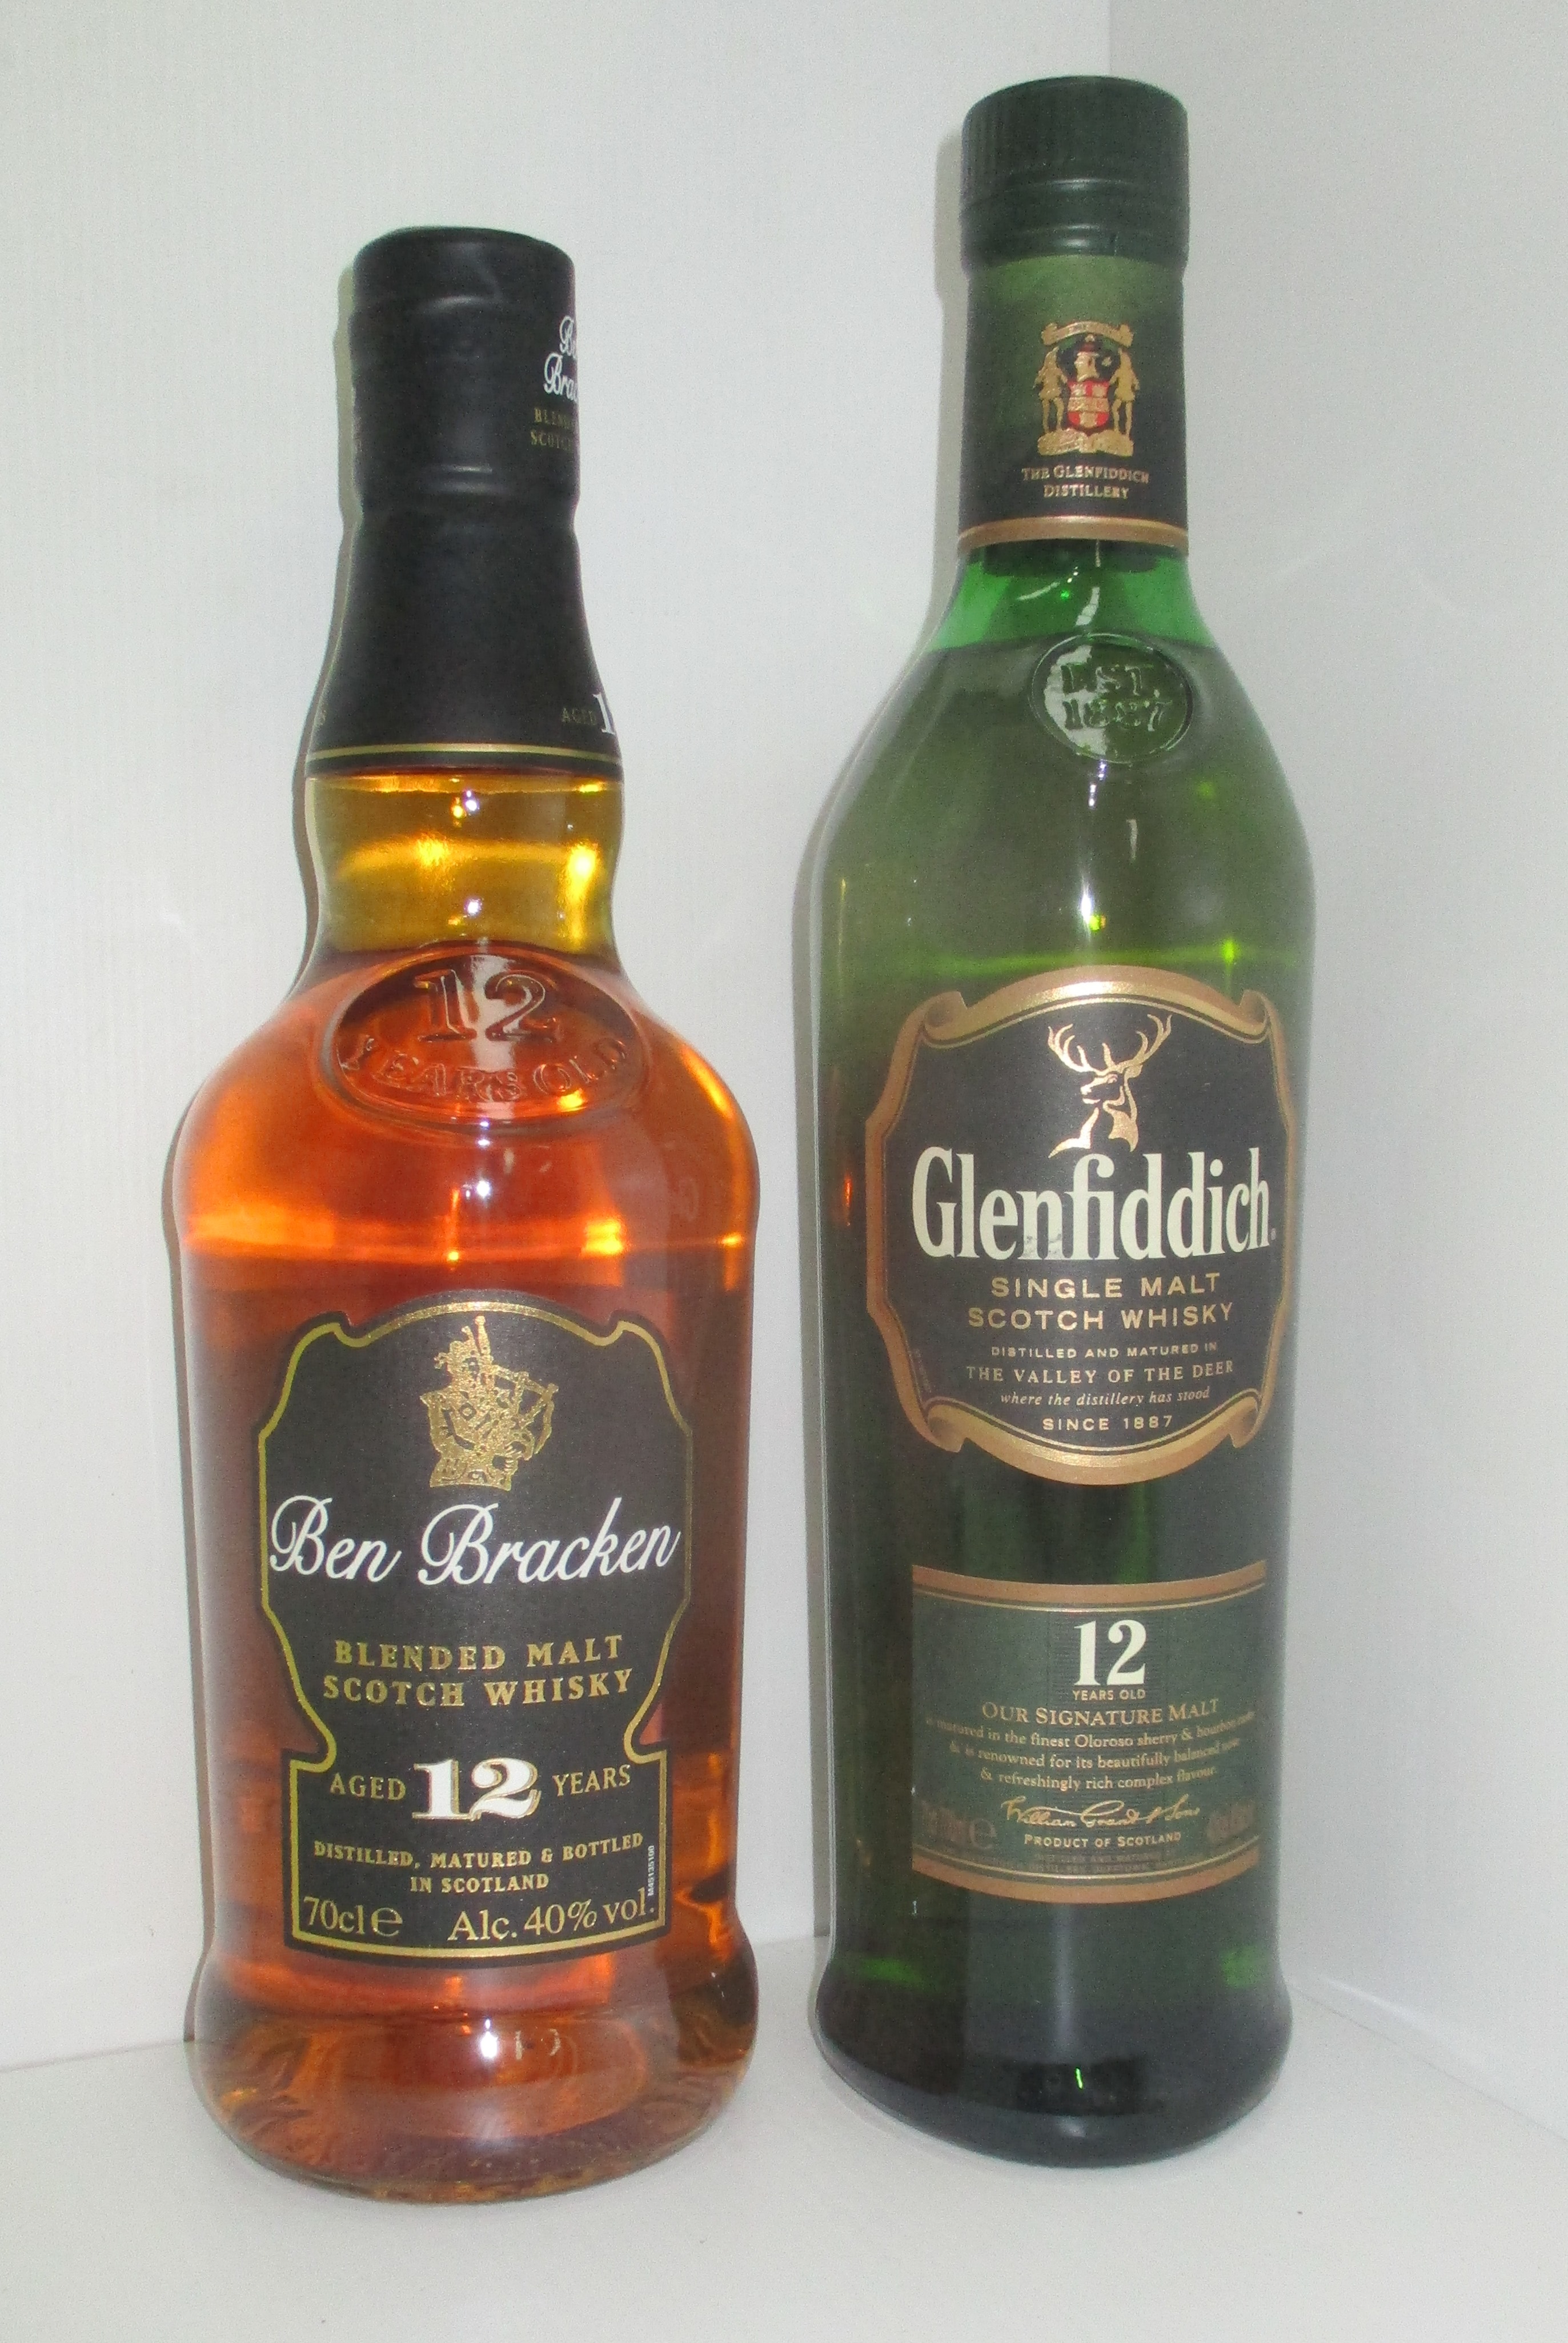 A 70cl bottle of Ben Bracken blended malt Scotch Whisky aged 12 years and a 70cl bottle of